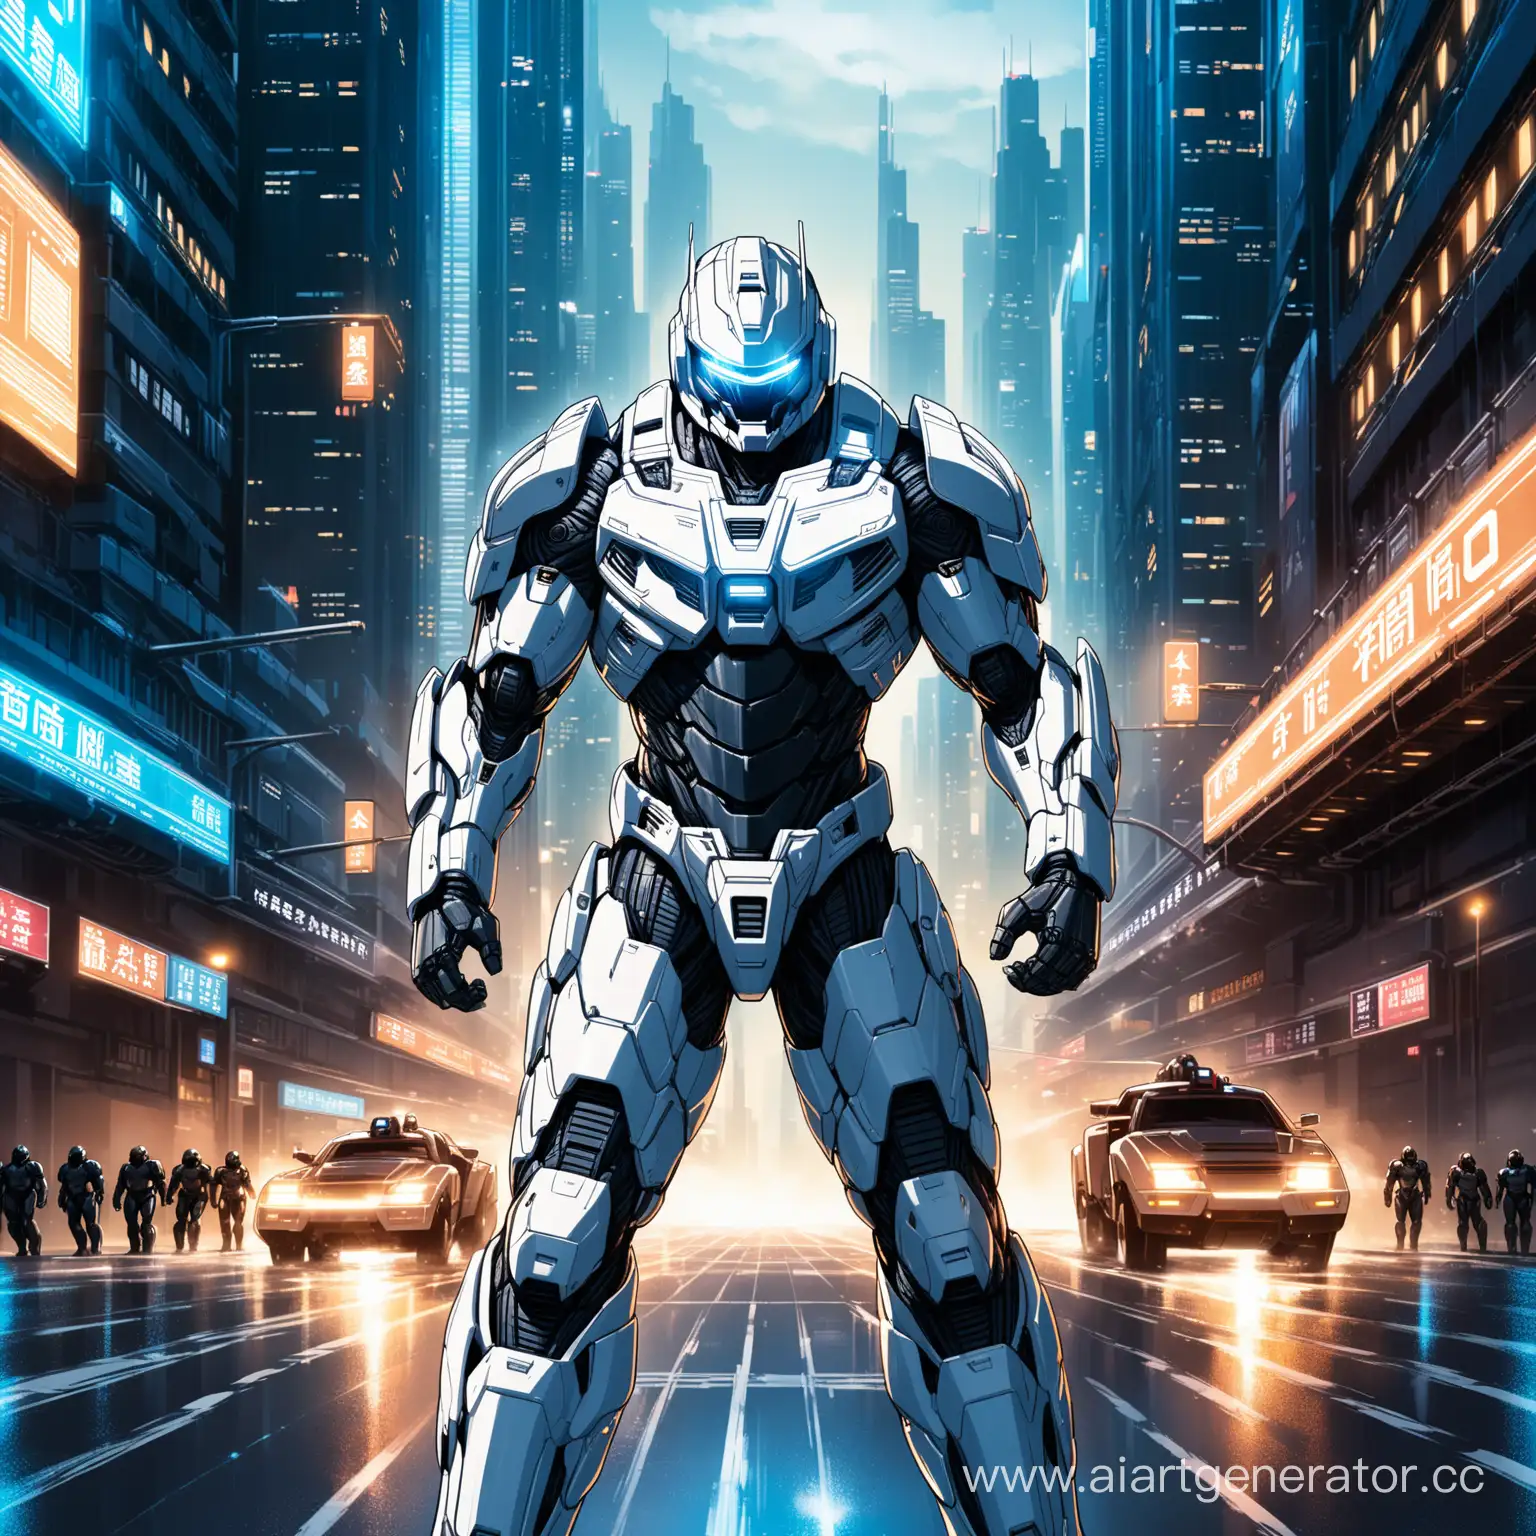 Powerful-White-Robocop-in-TransformerStyle-Armor-on-Night-Megalopolis-Streets